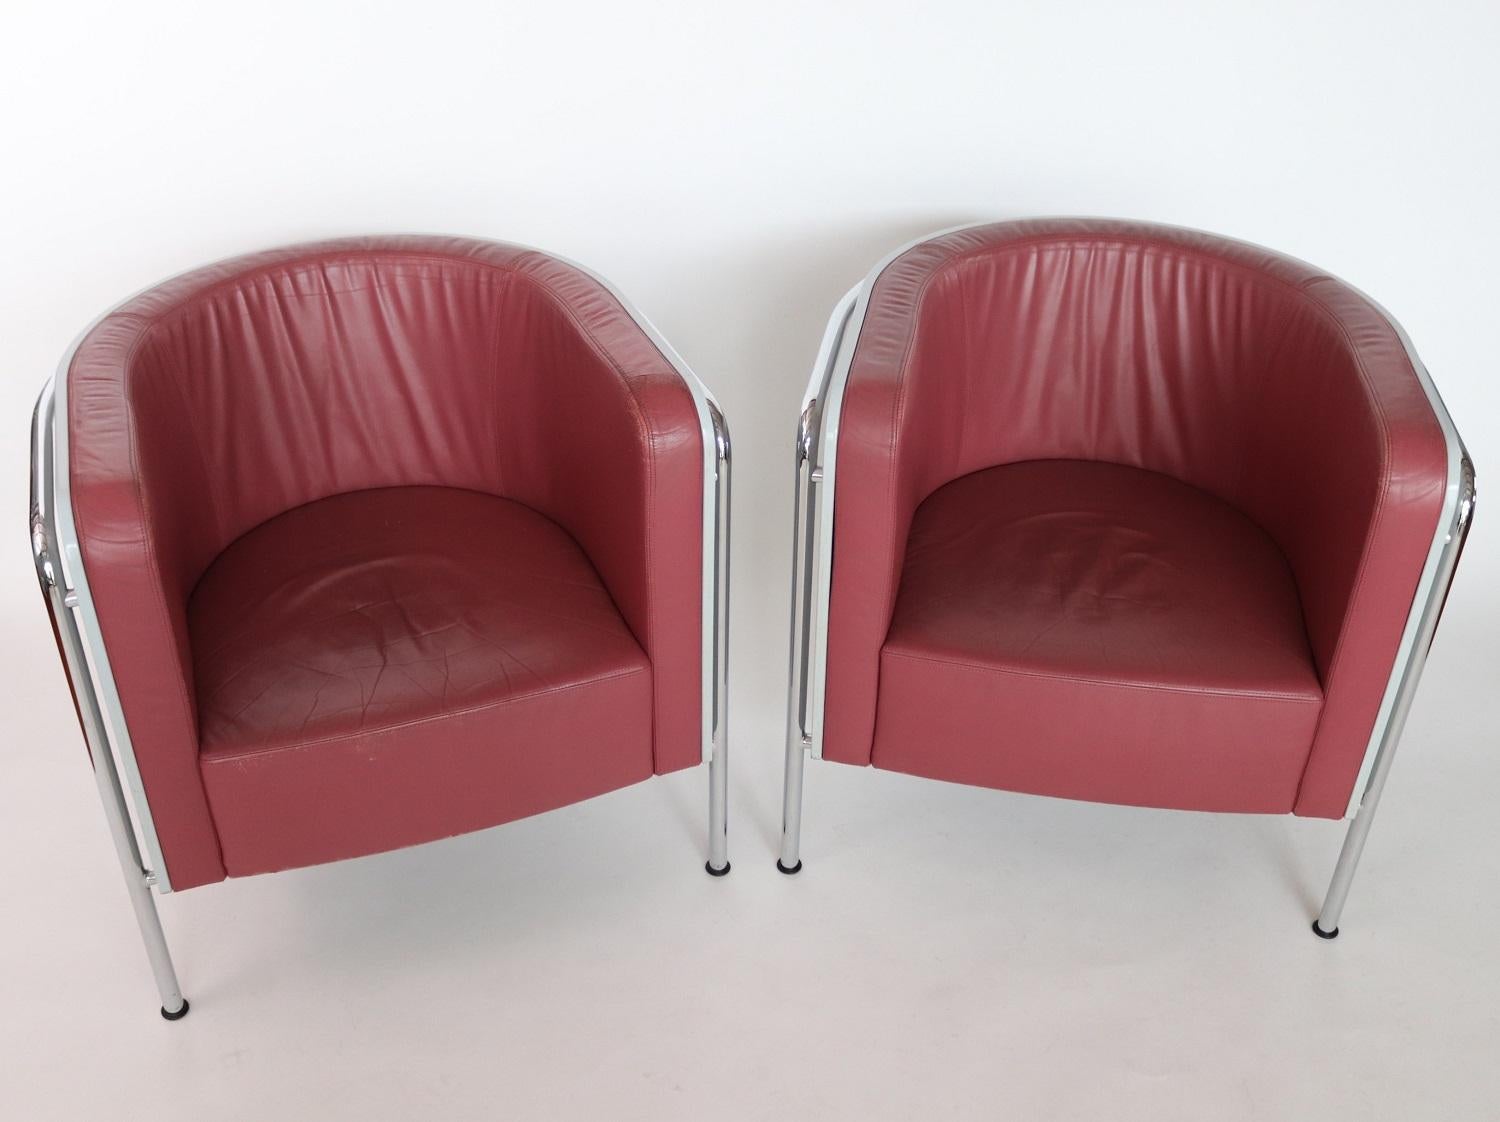 Lounge Chairs in Bentwood and Leather by Christoph Zschocke for Thonet, 1990s For Sale 10